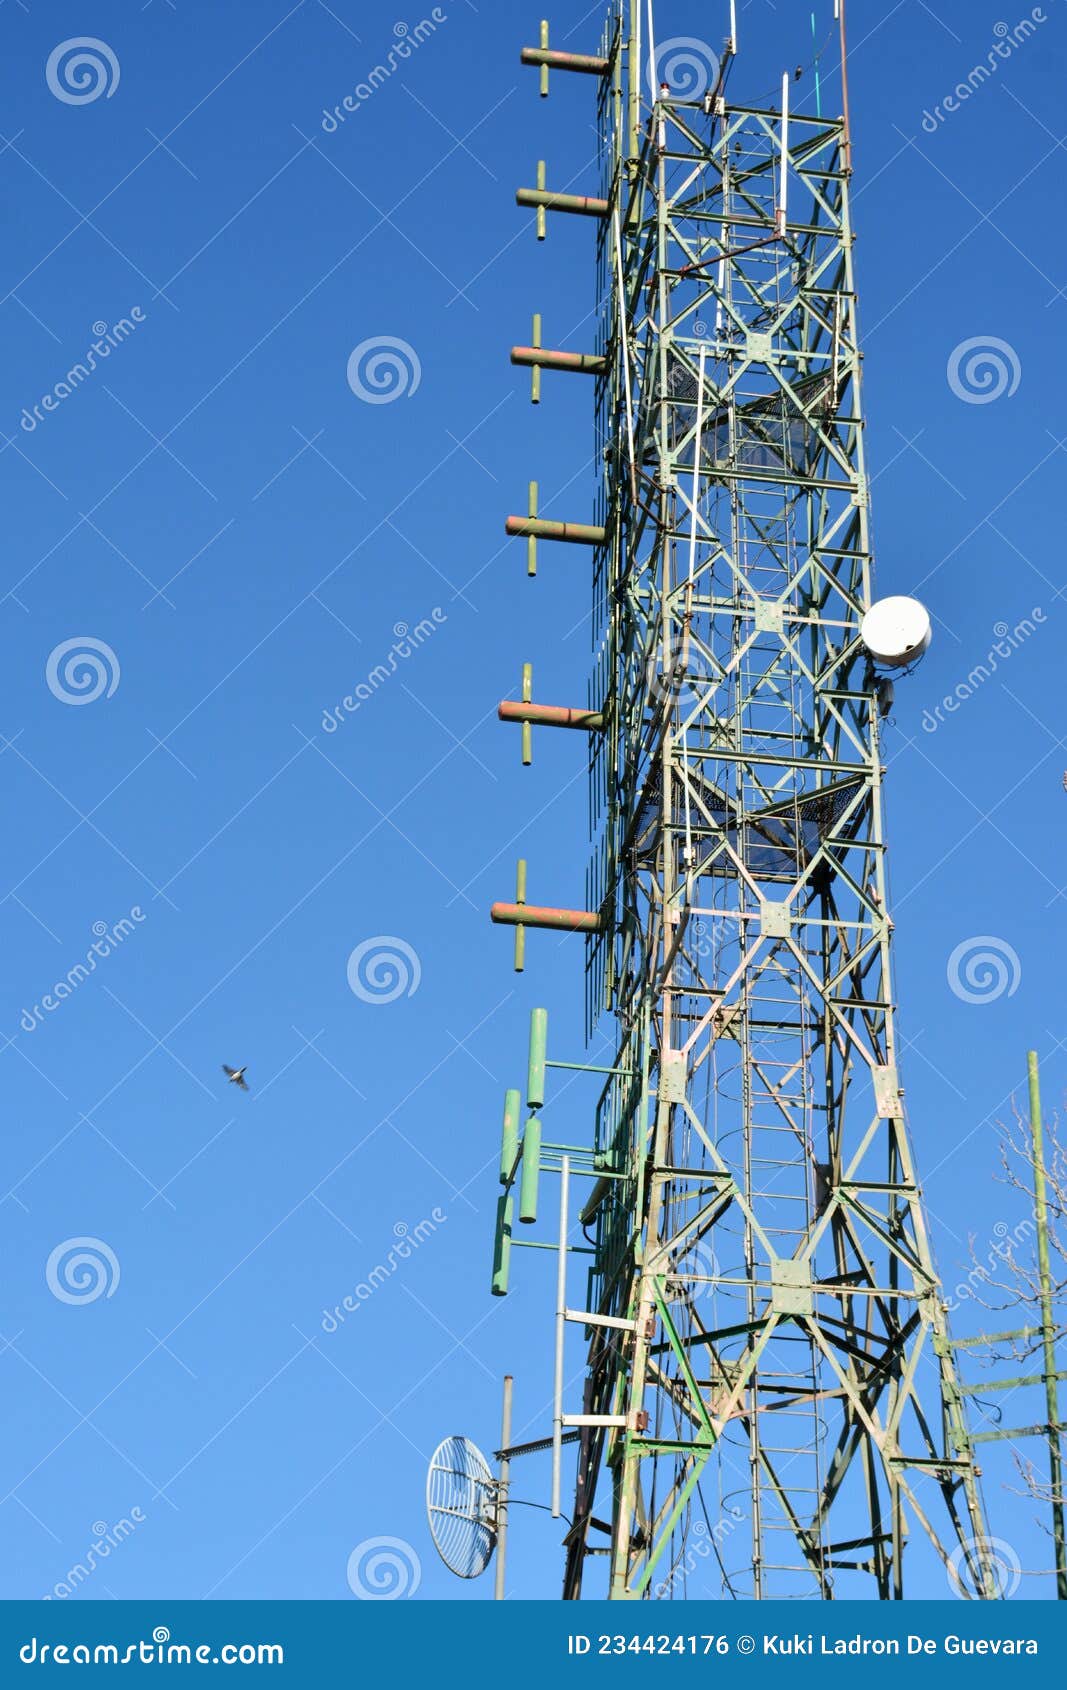 detail of a telecommunications tower